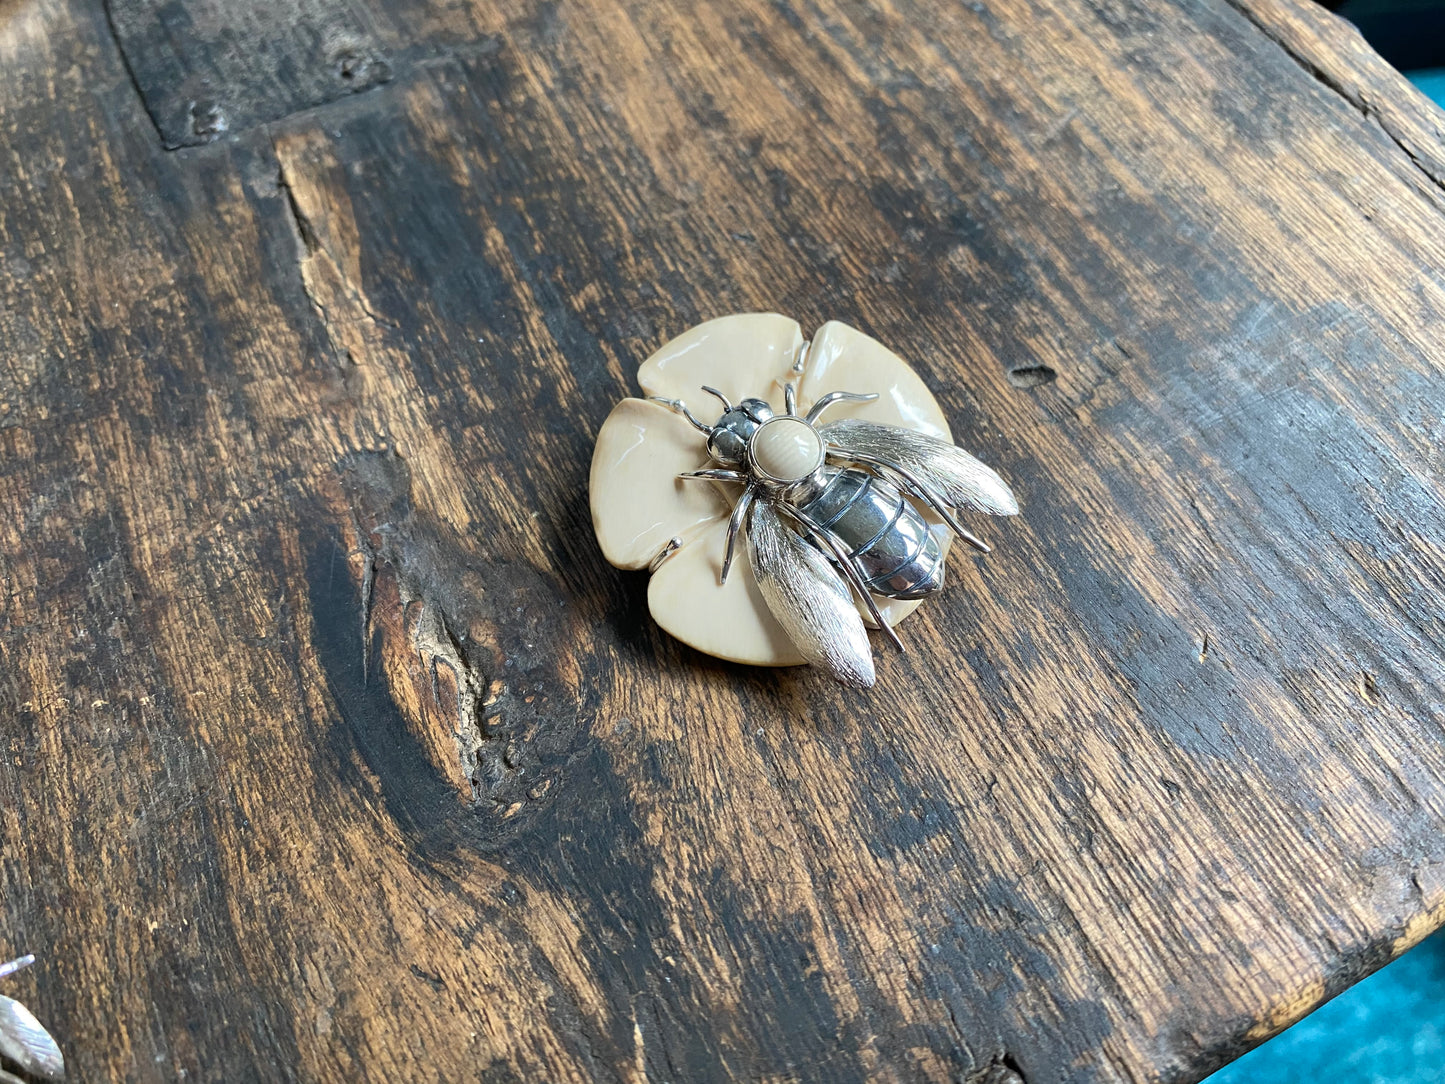 Bee on Forget Me Not Pin/ Pendant